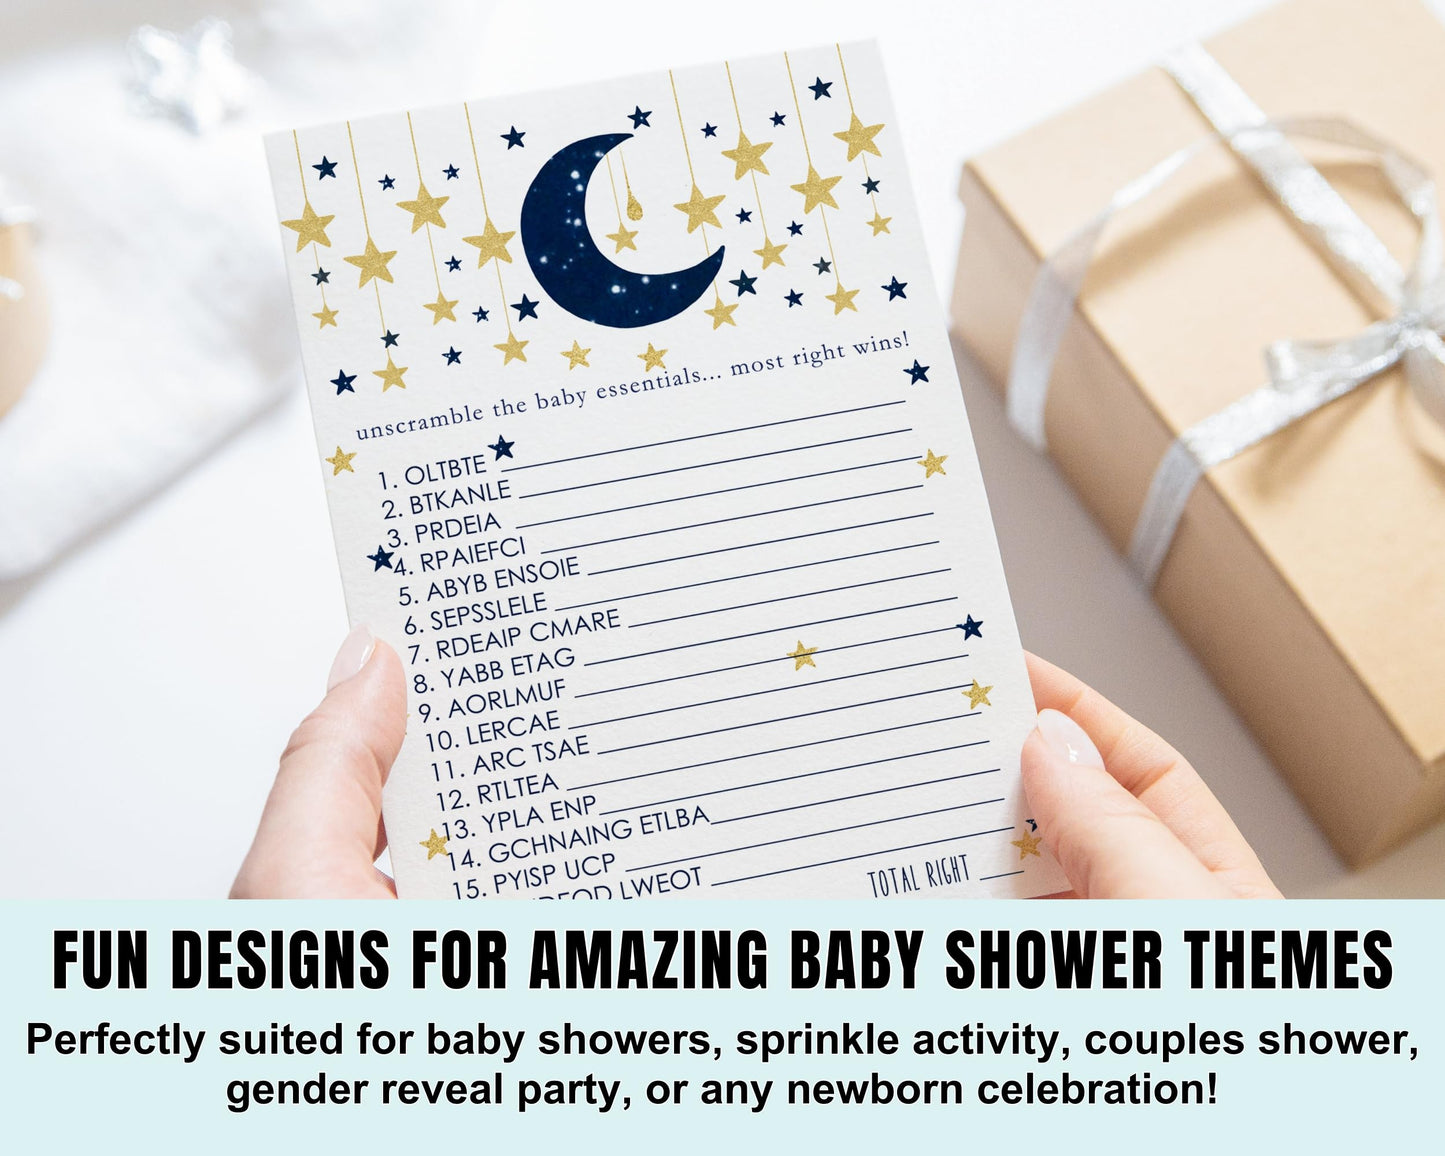 Star Baby Shower Games Word Scramble Cards (25 Pack) Unscramble Activity Cards Gender Reveal - Boys Celestial Moon Design Navy Gold Themed - Printed 5x7 Size SetPaper Clever Party